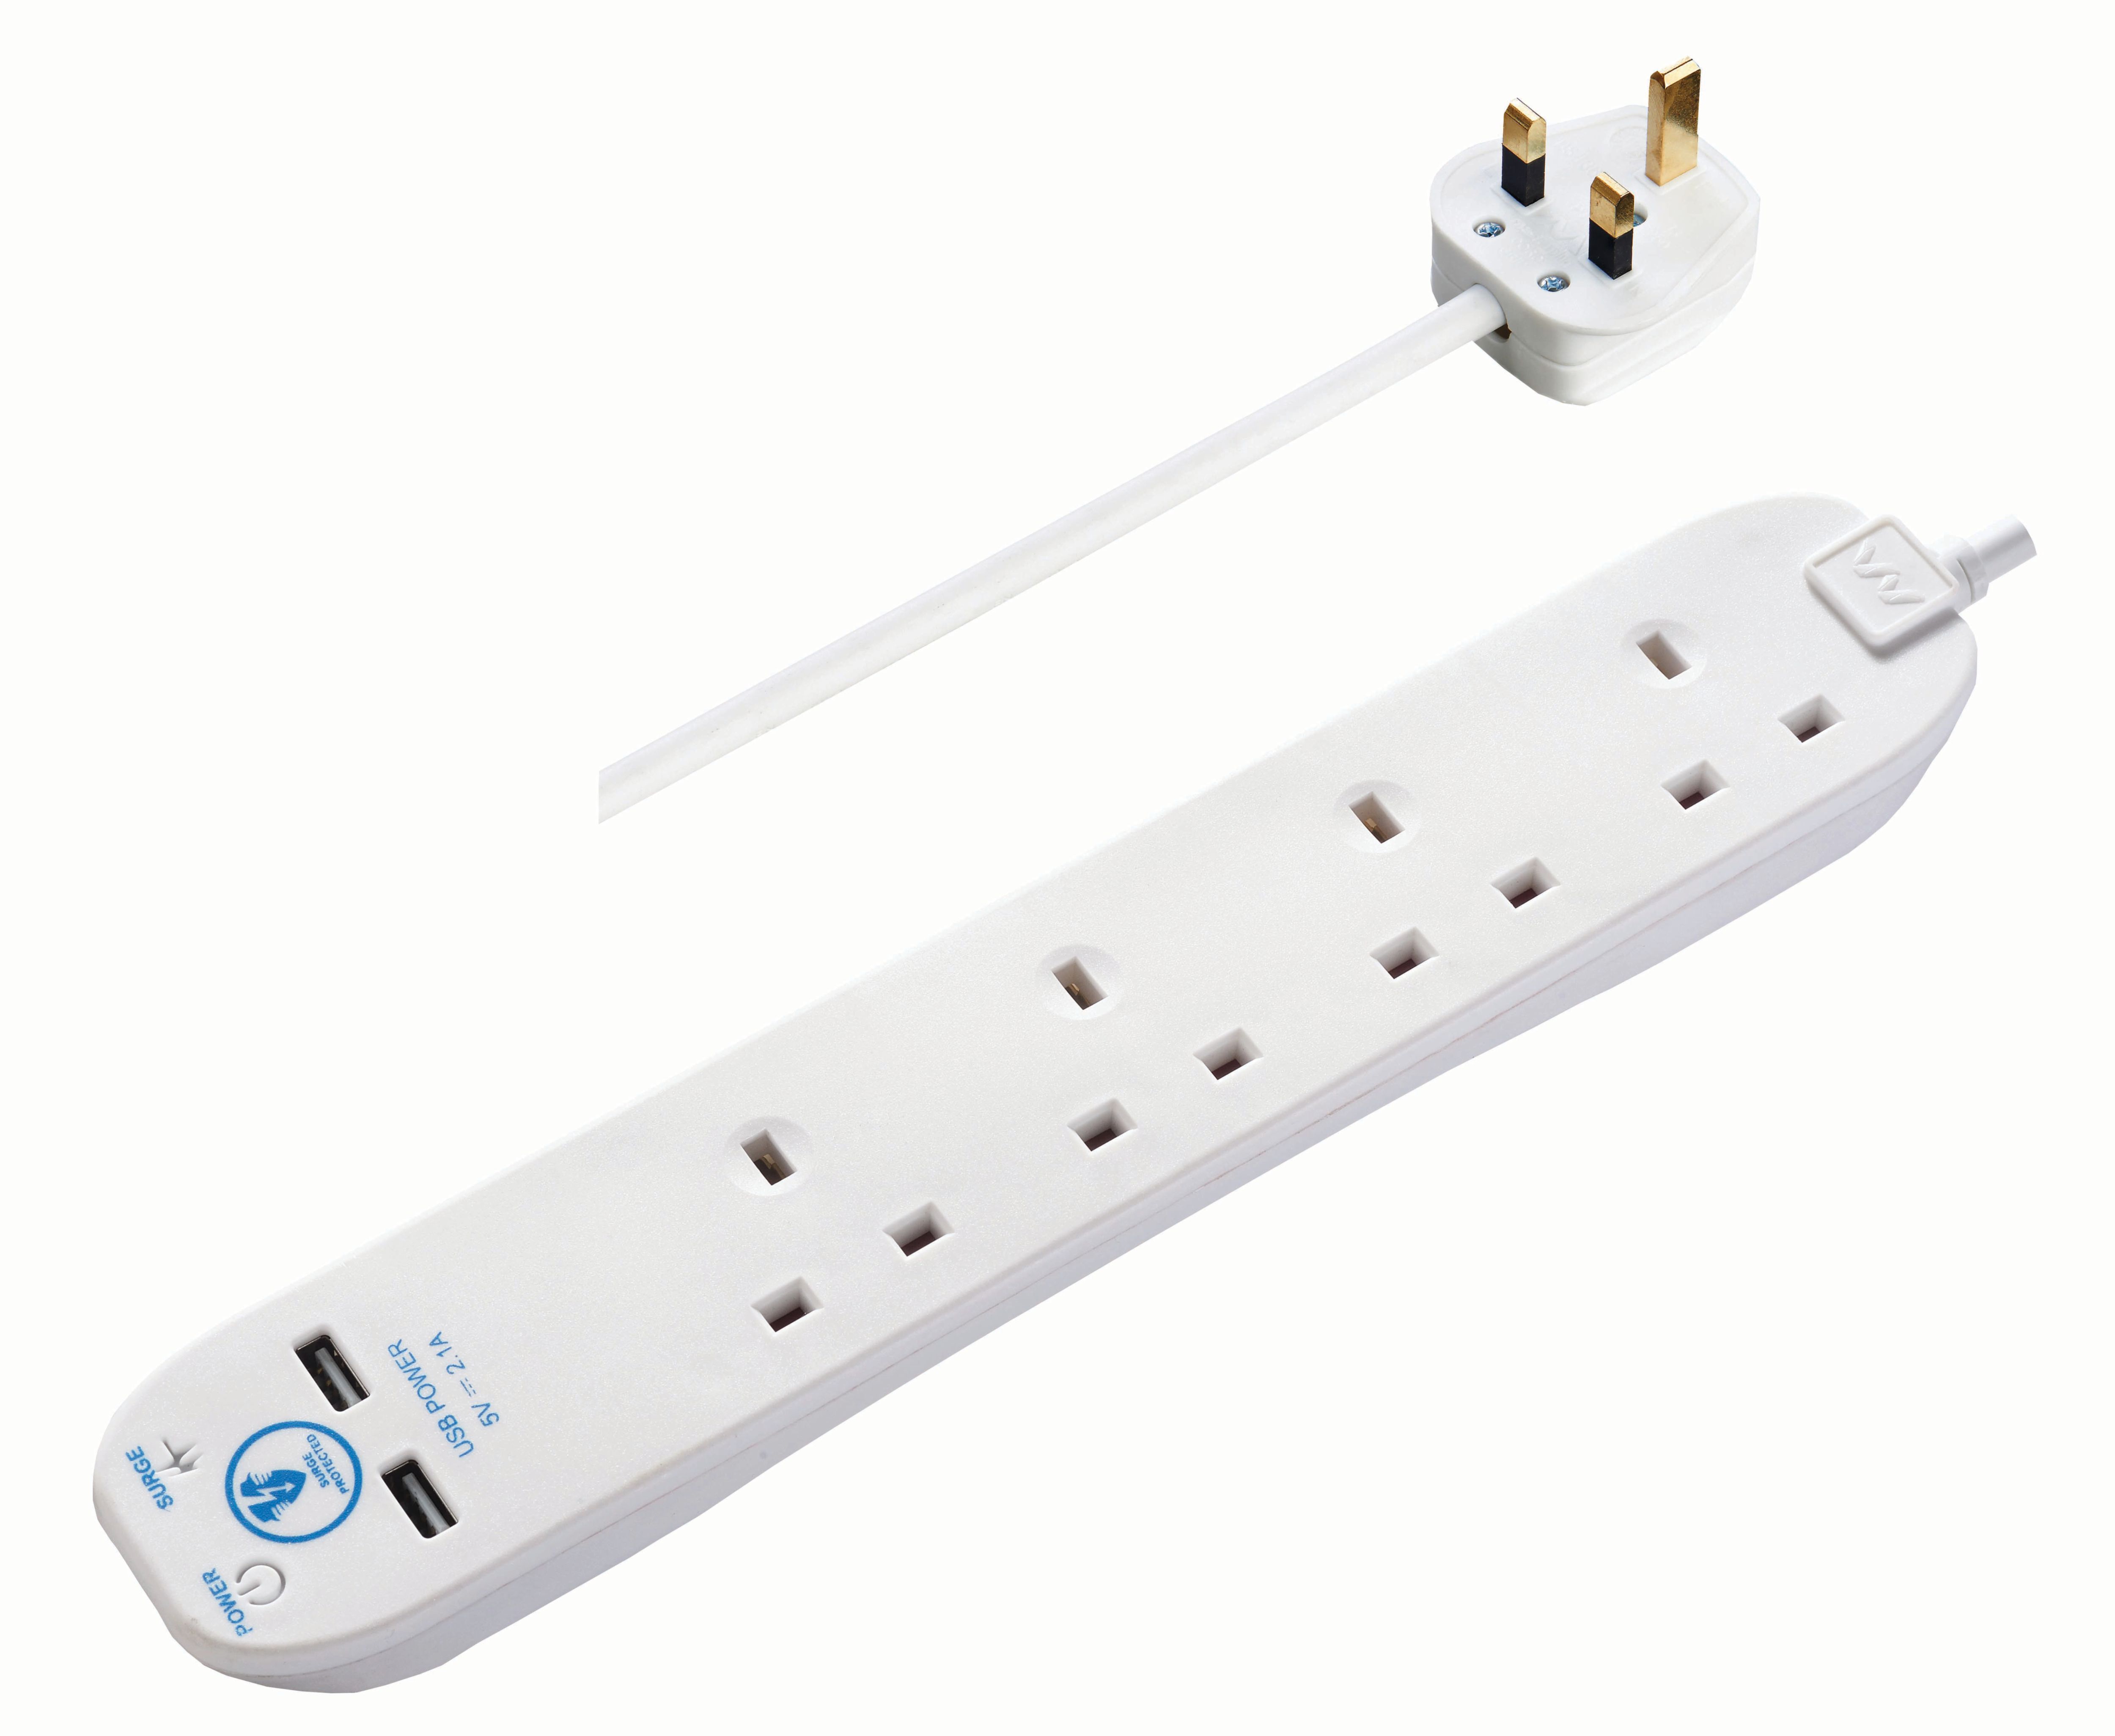 Masterplug 13A 4 Socket White Extension Lead with Surge Protection & USB - 2m